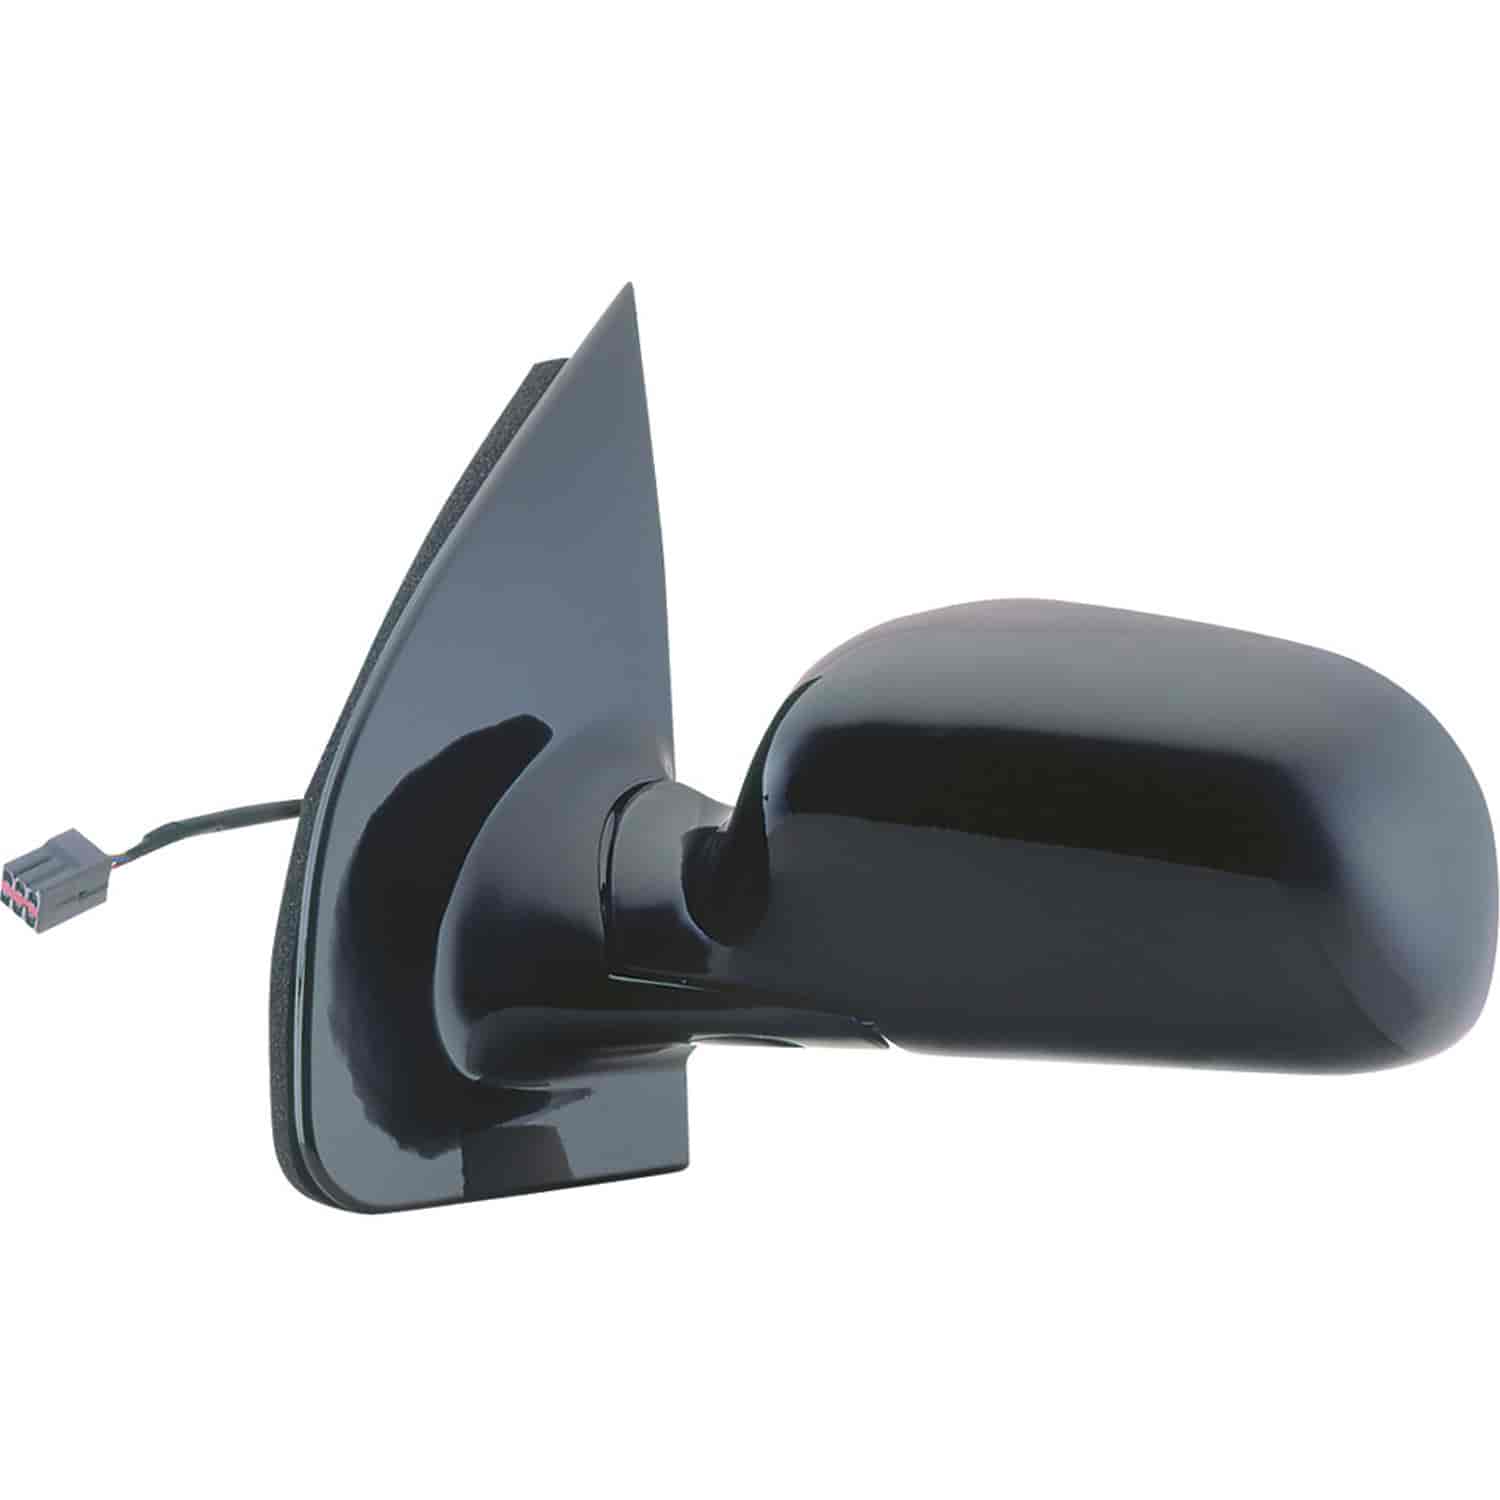 OEM Style Replacement mirror for 99-00 Ford Windstar driver side mirror tested to fit and function l